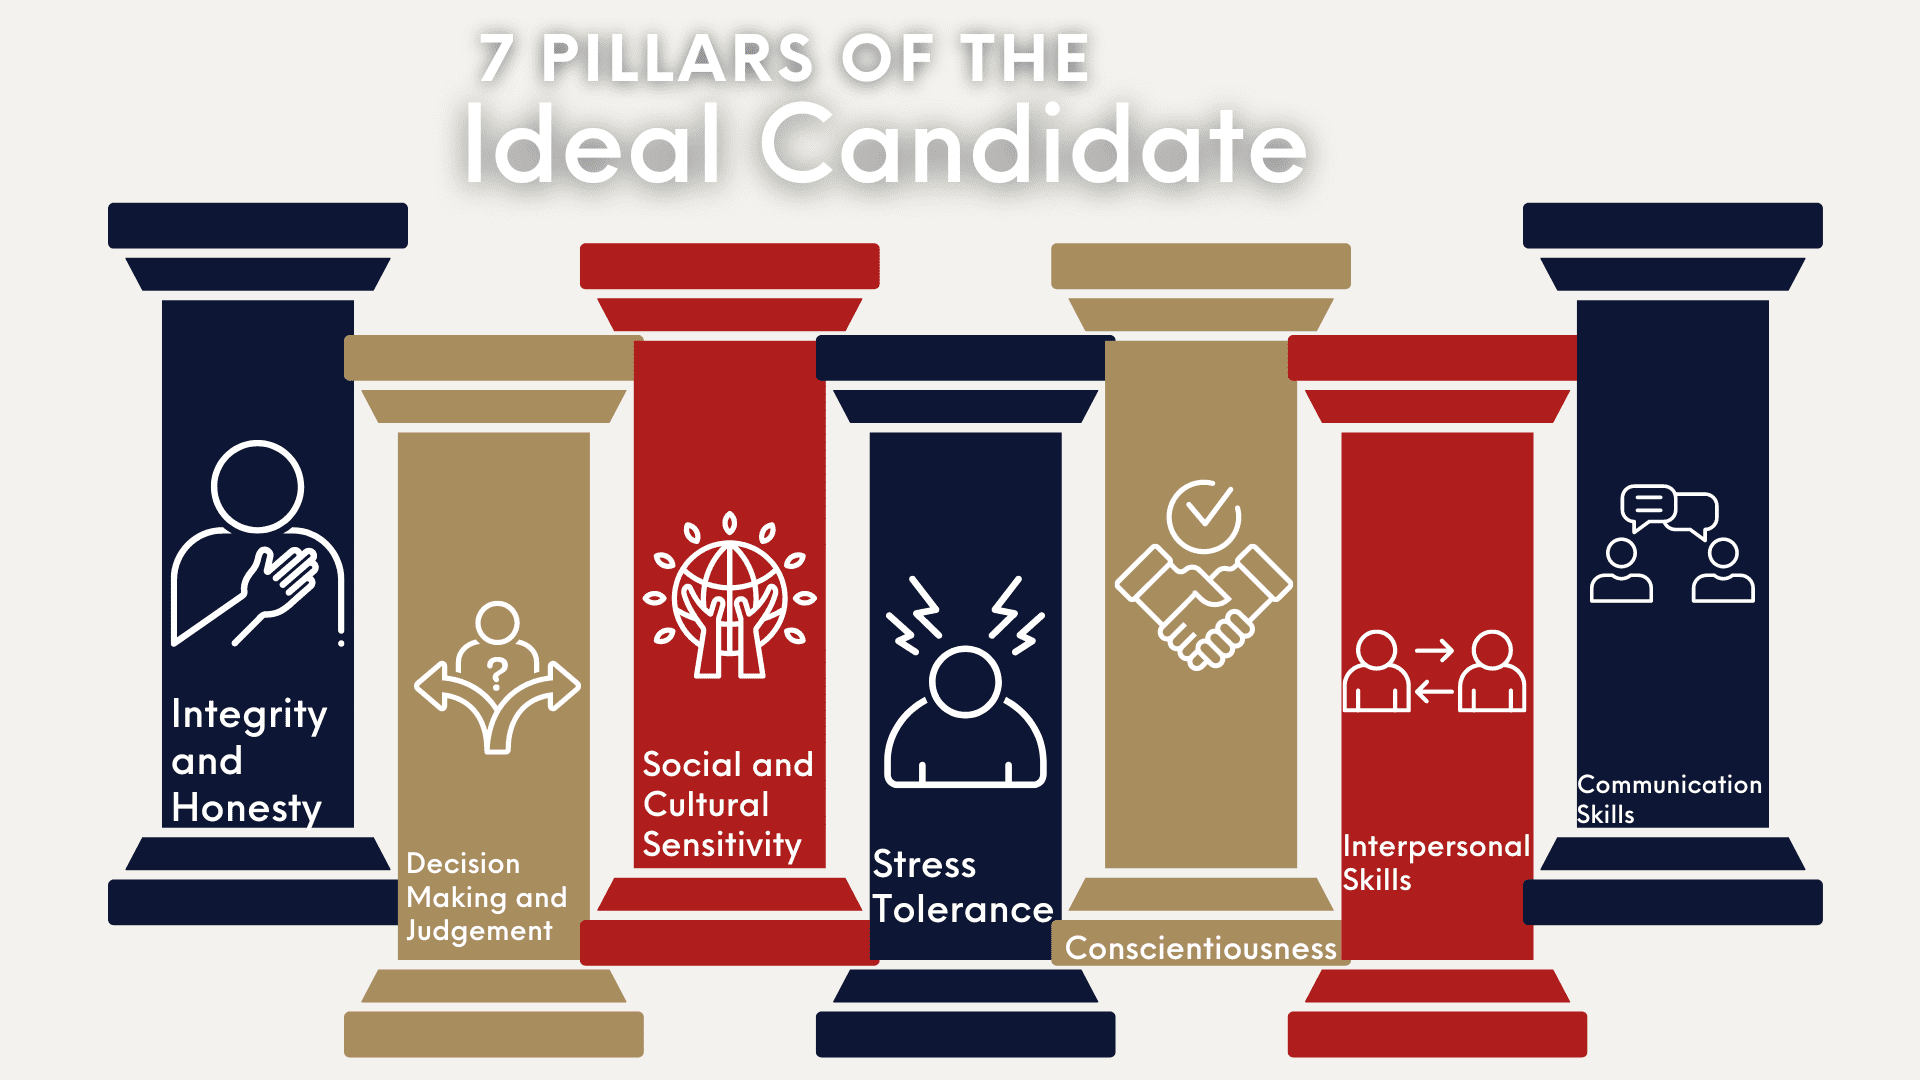 7 Pillars of the ideal candidate